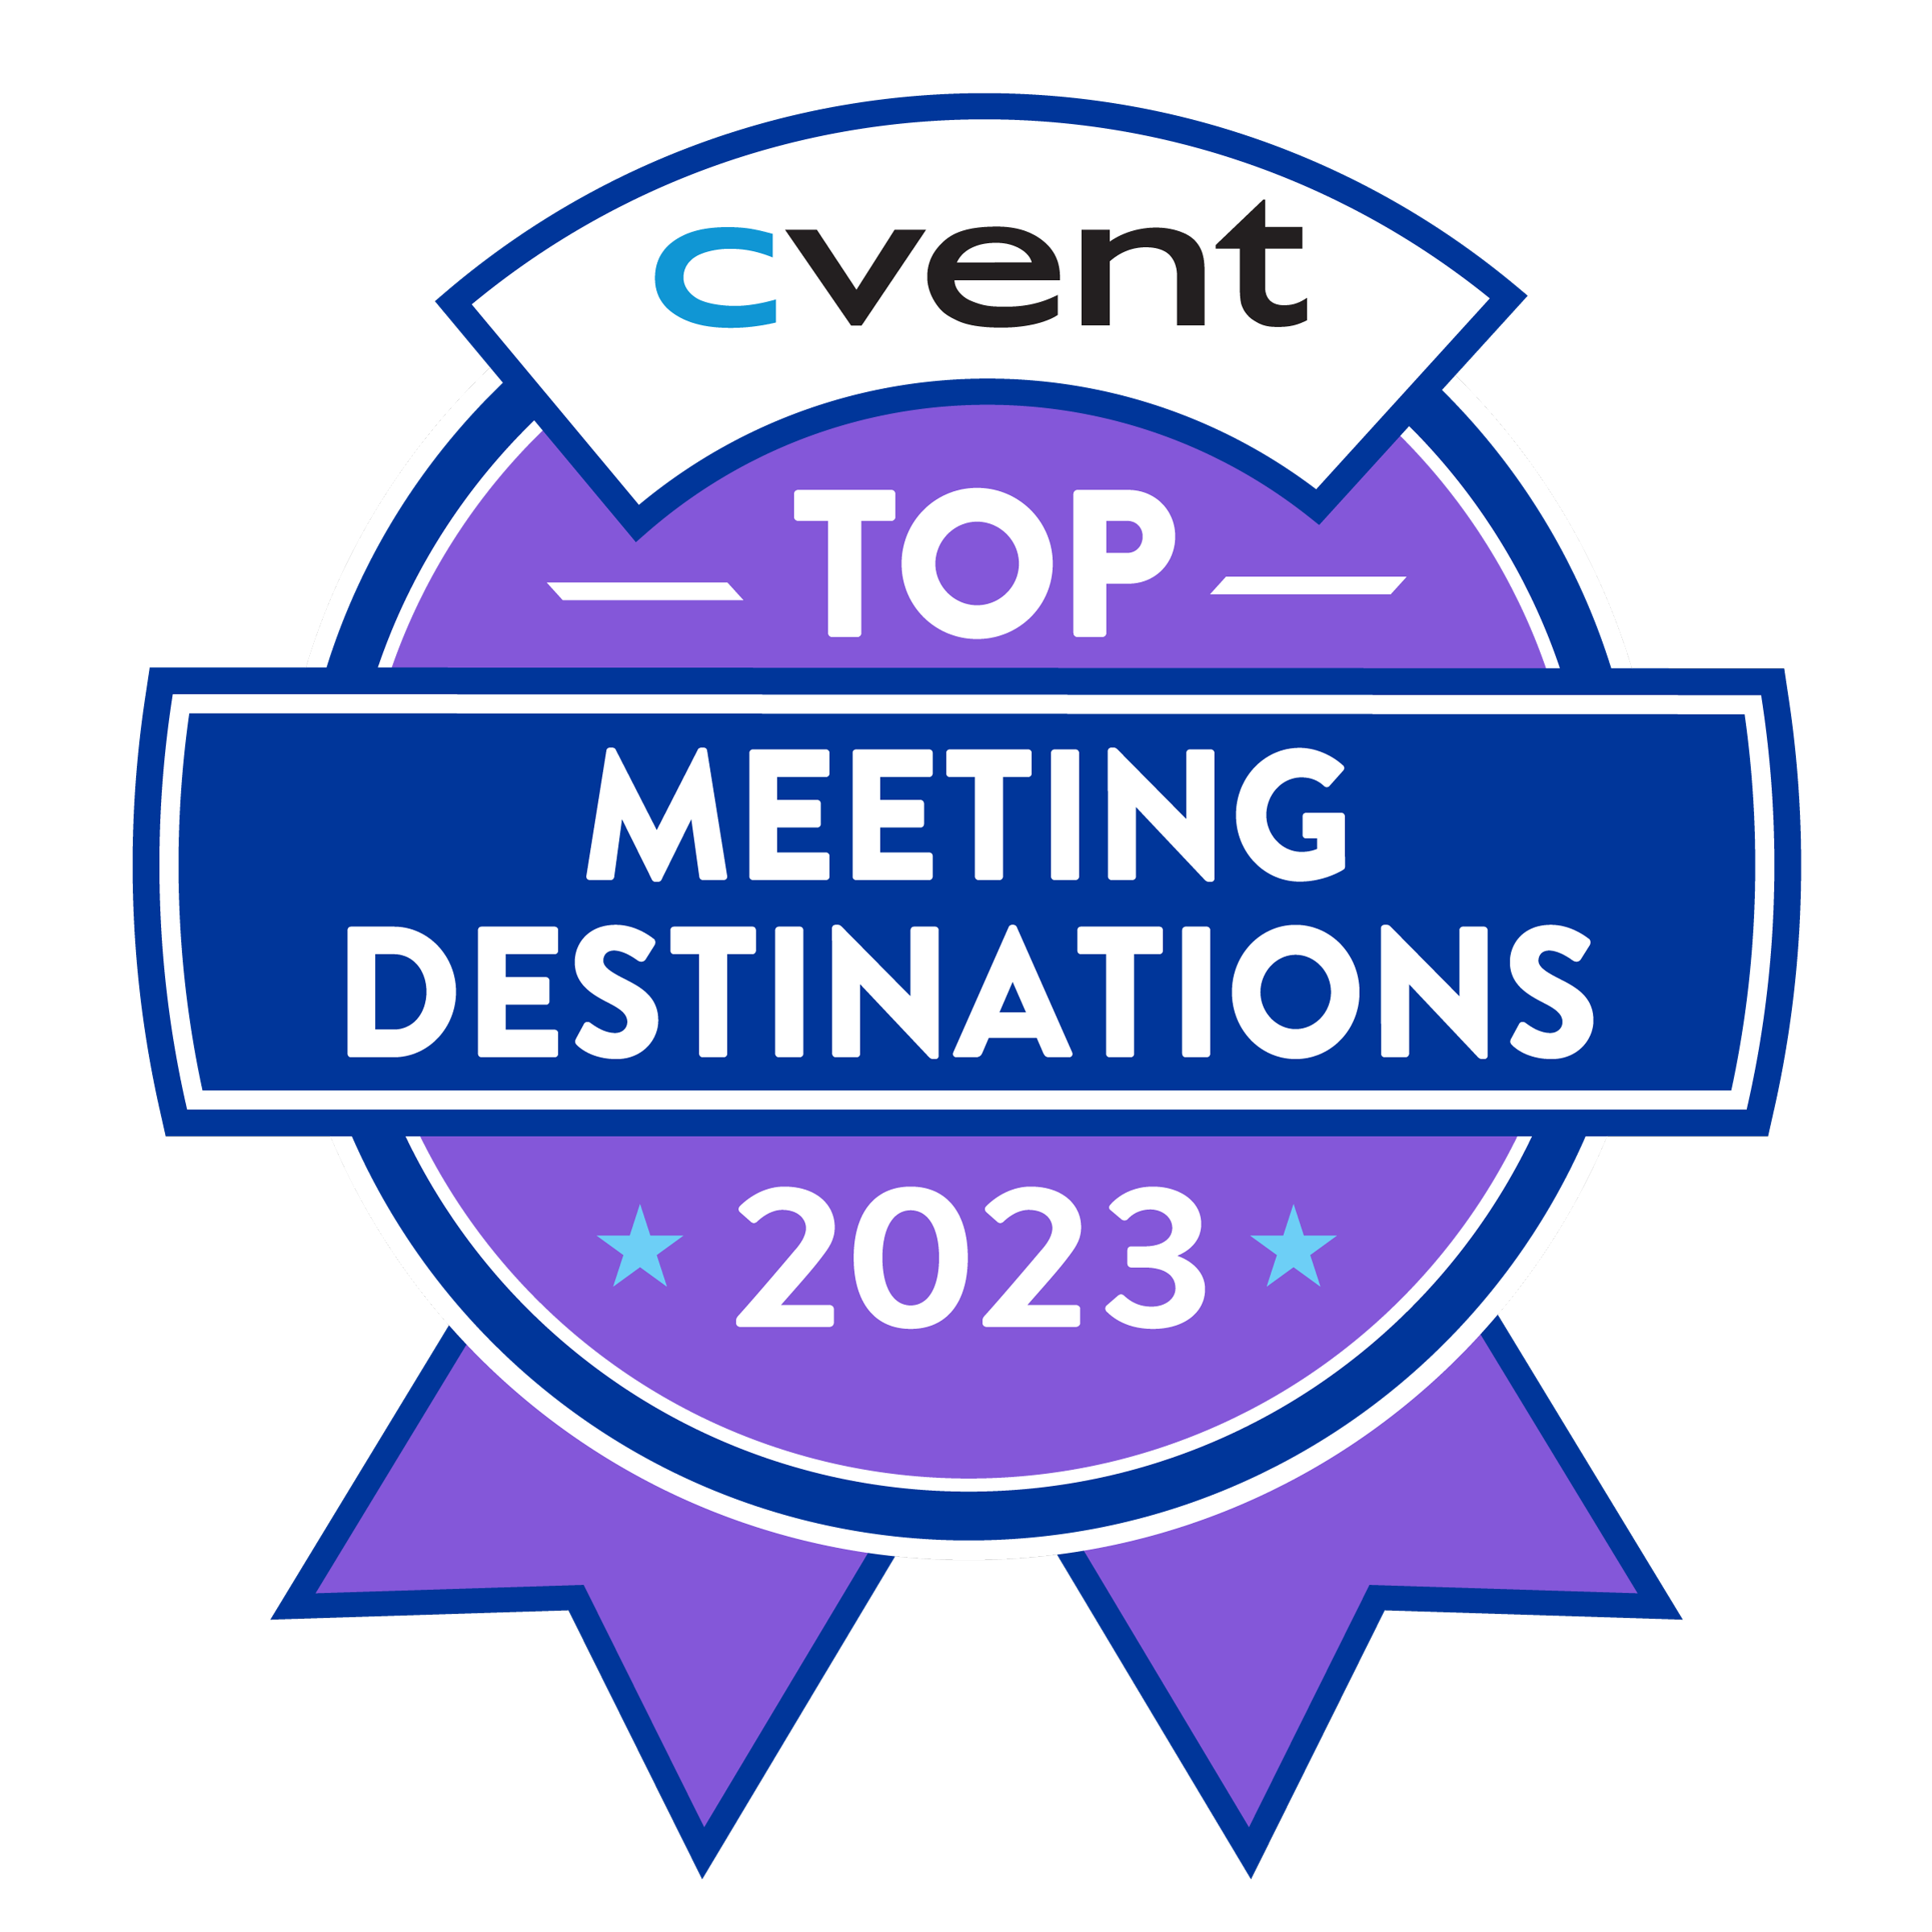 Coronado was just named one of the top meeting destinations in America by Cvent